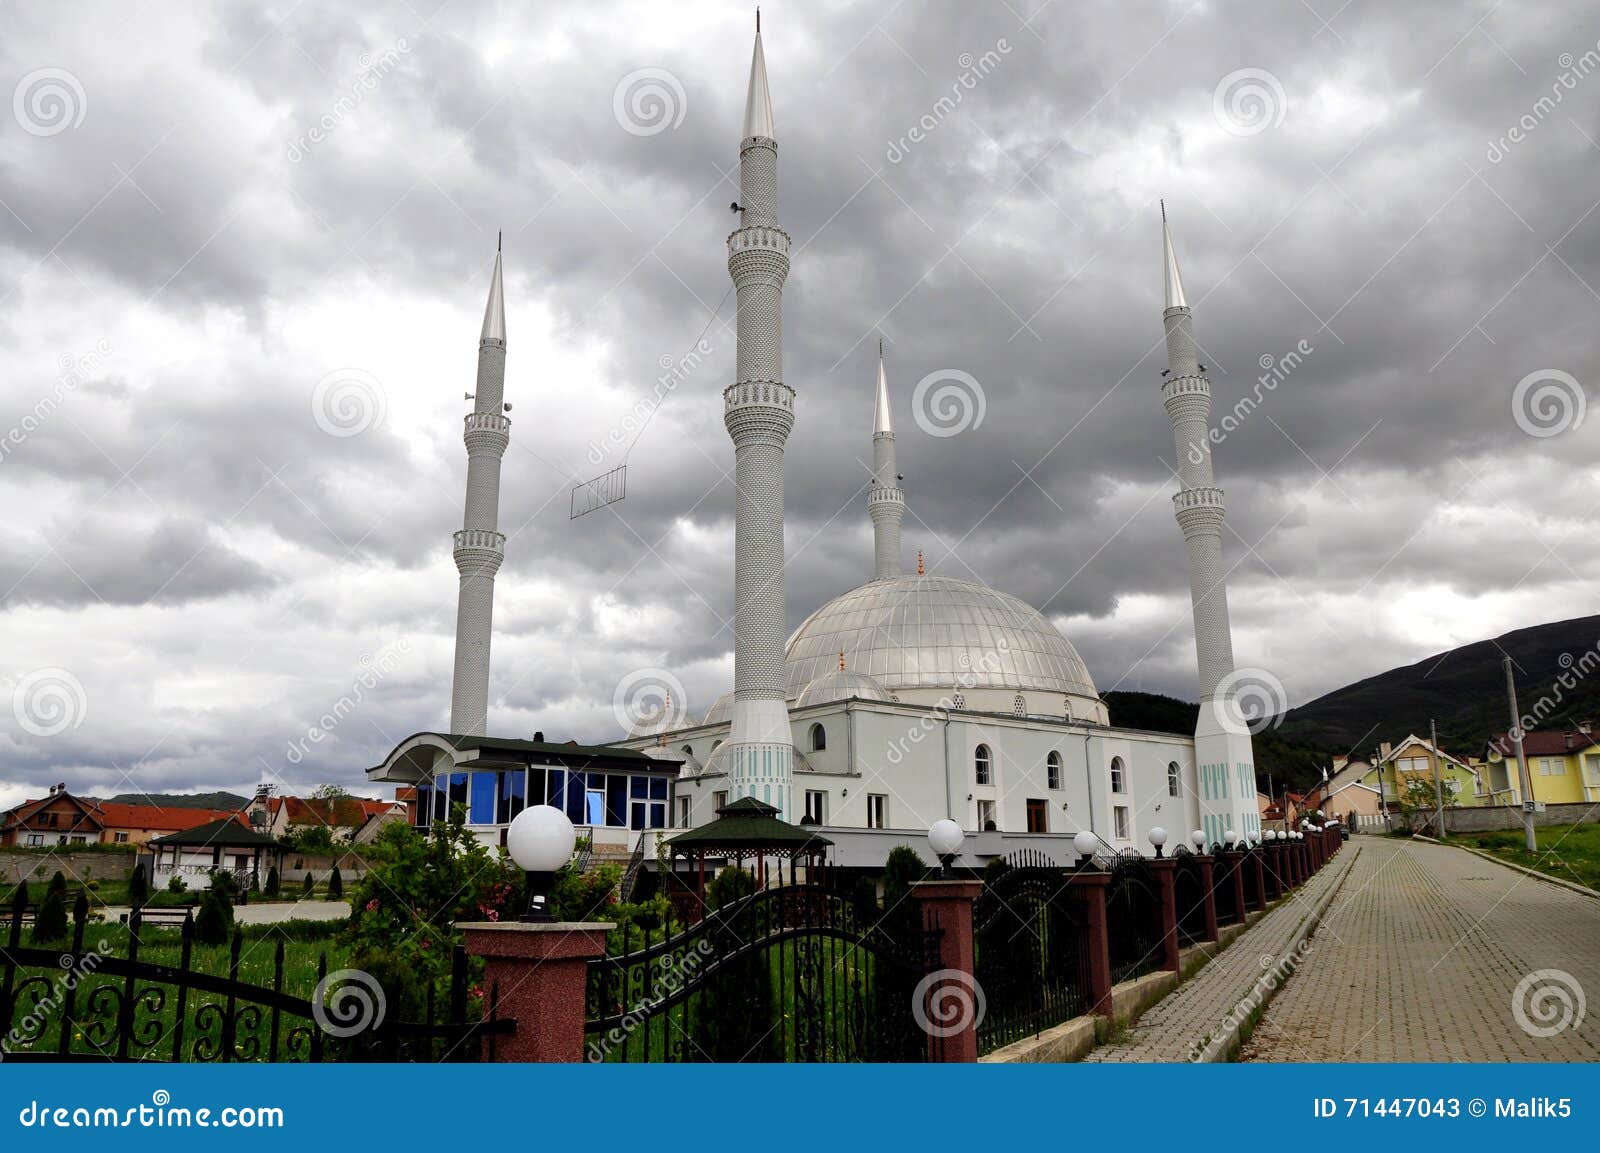 the mosque with four minarets